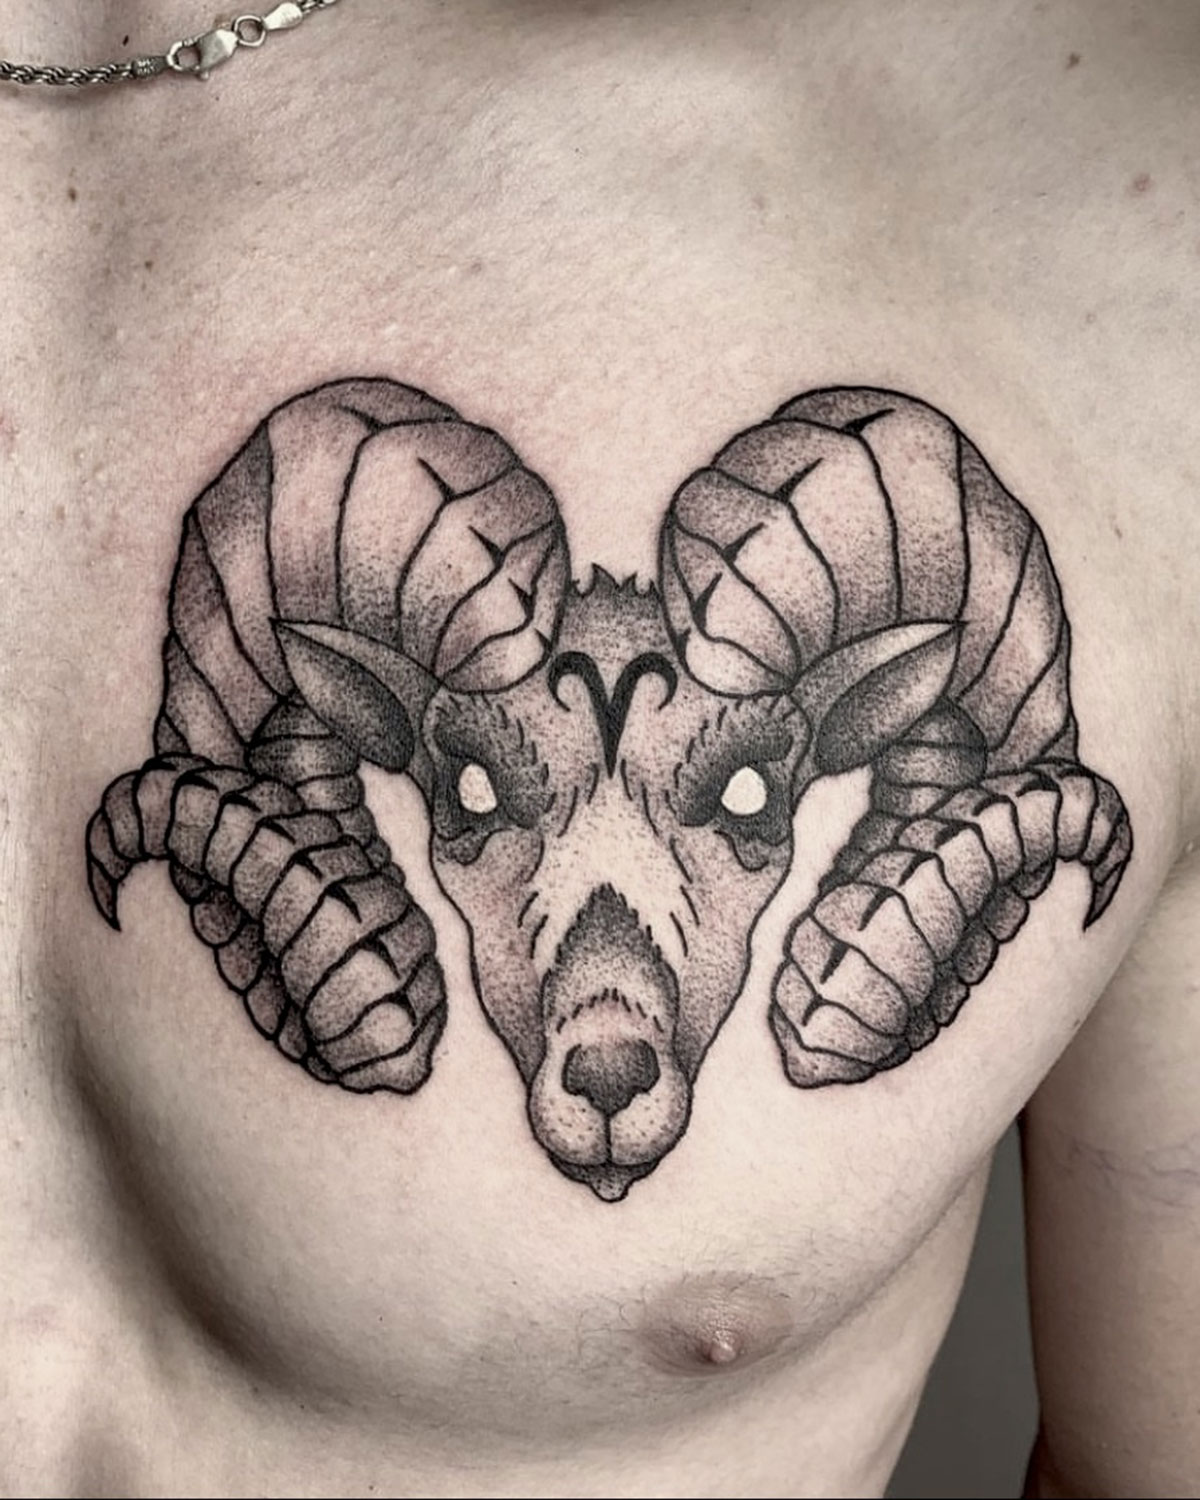 Pin by Shelby Lowe on tats | Picture tattoos, Tattoos, Aries ram tattoo